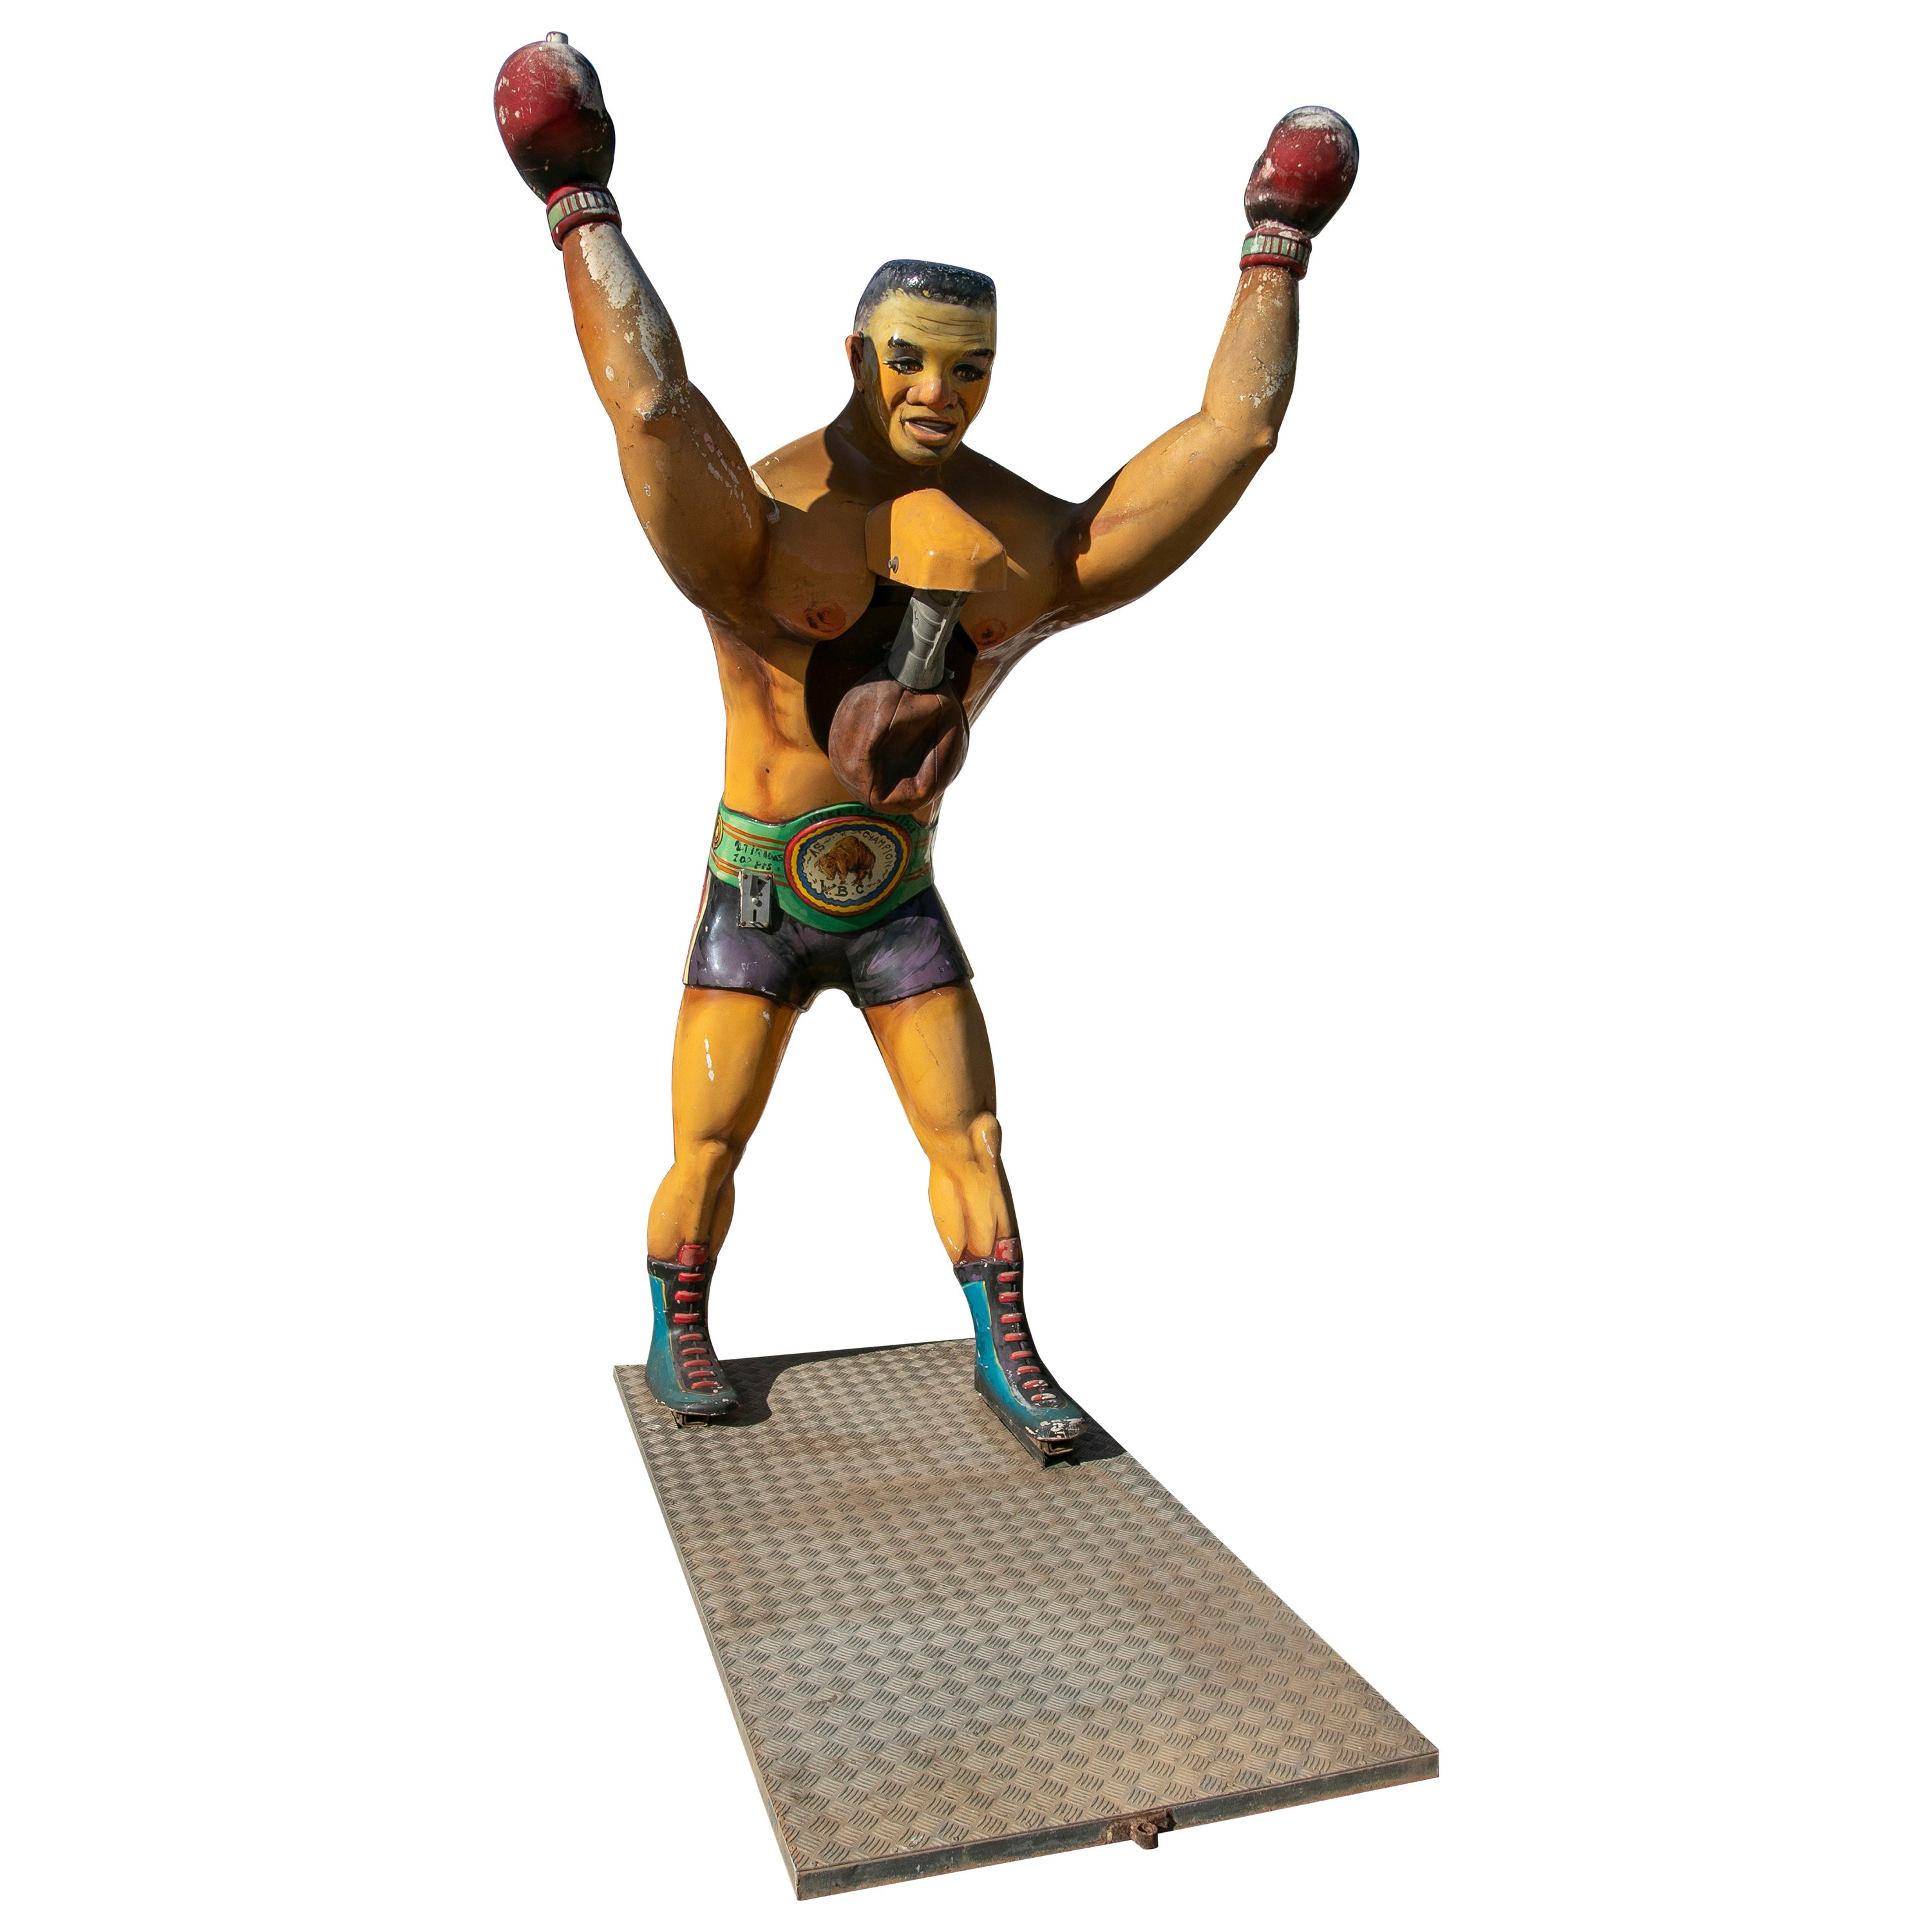 Large 1970s Spanish Hand Painted Resin Boxer Fairground Sculpture w/ Scoreboard For Sale